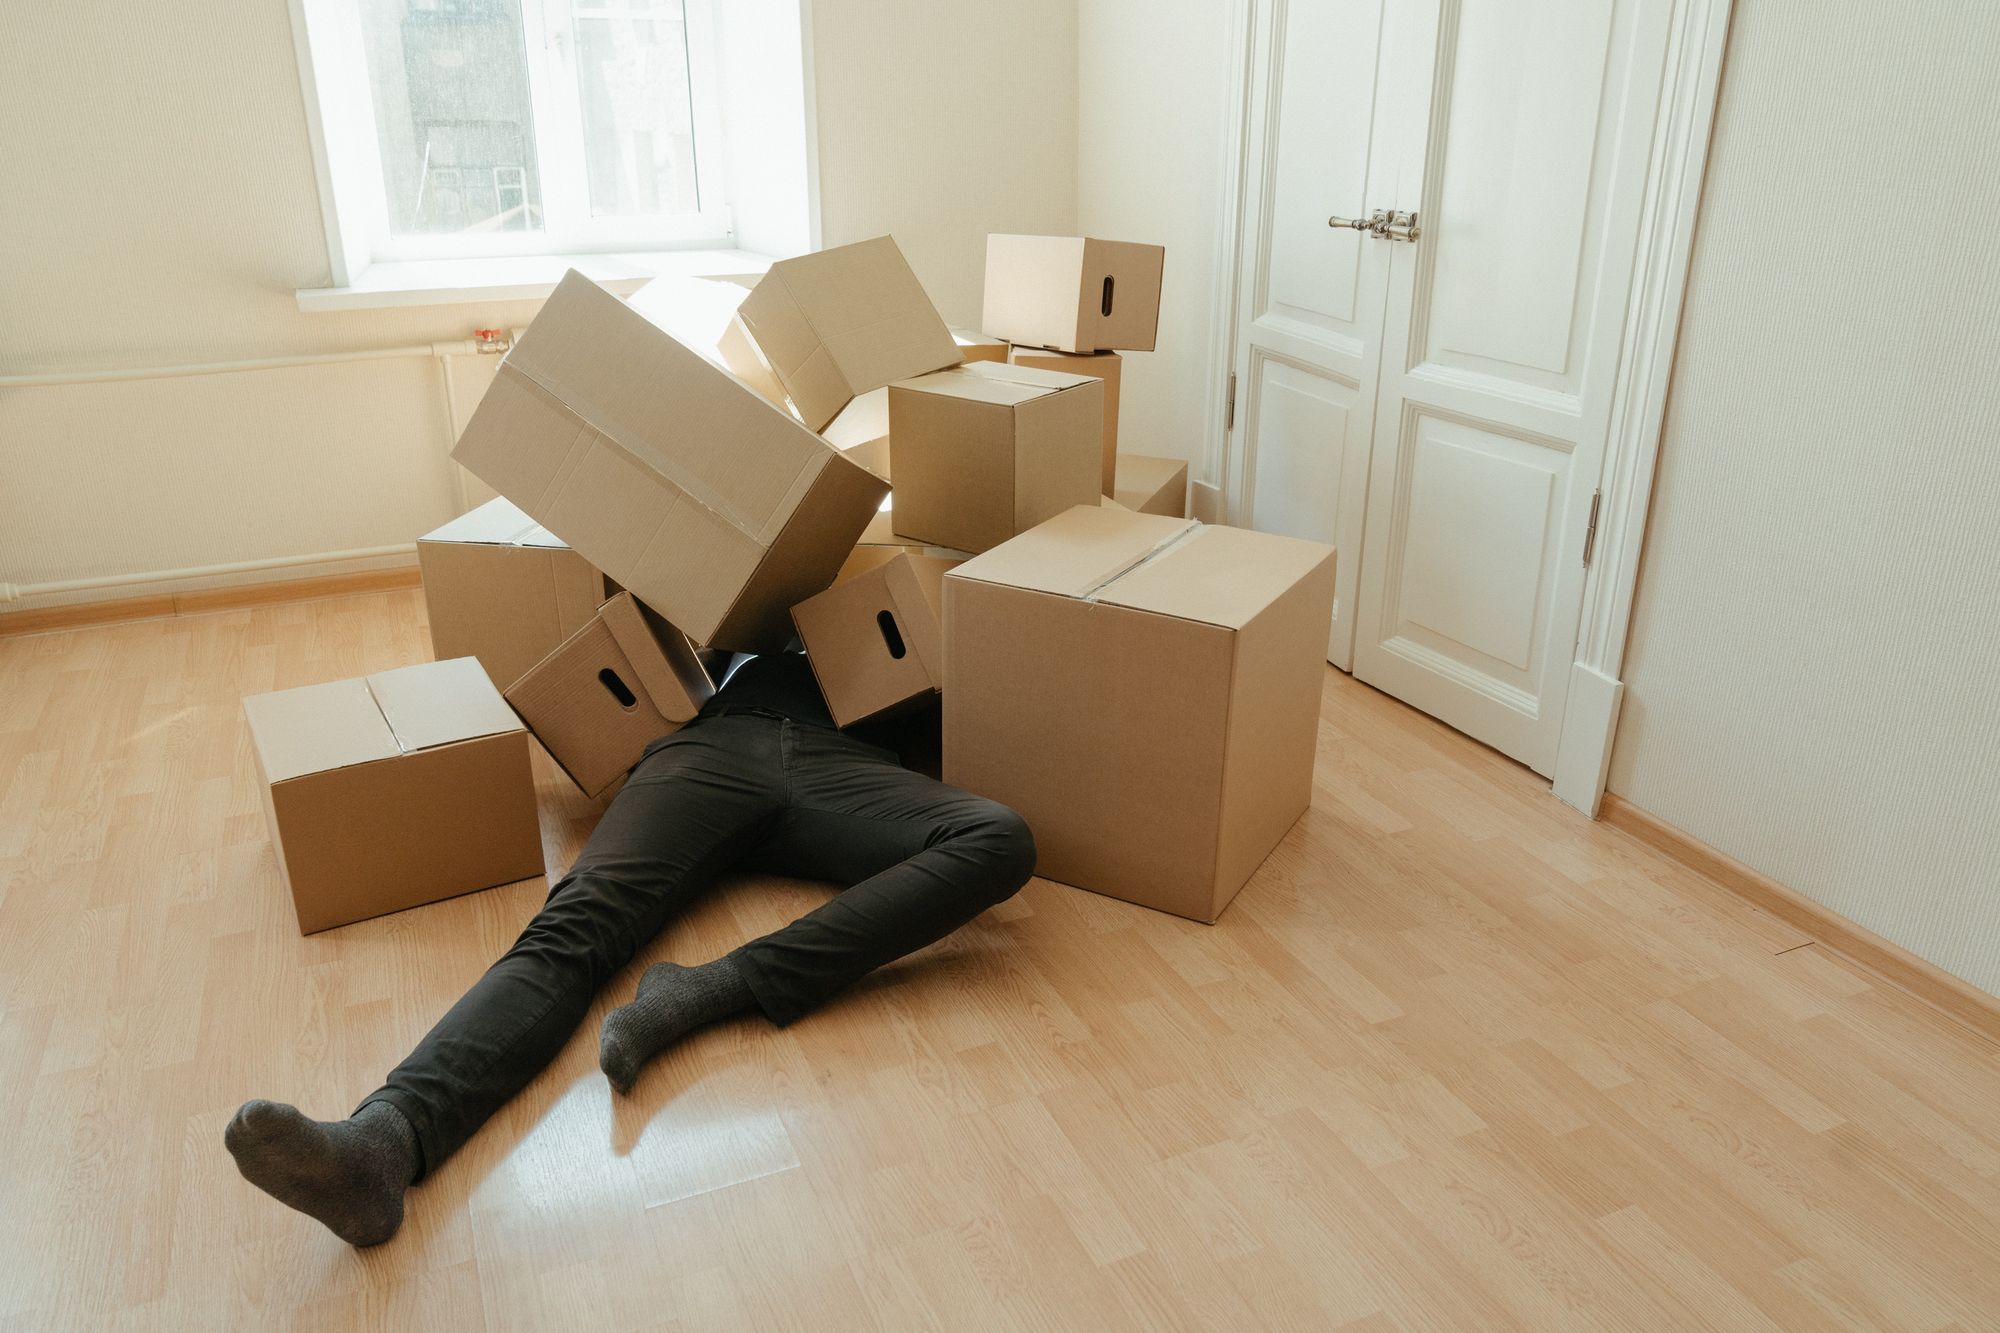 A man half-buried under moving boxes